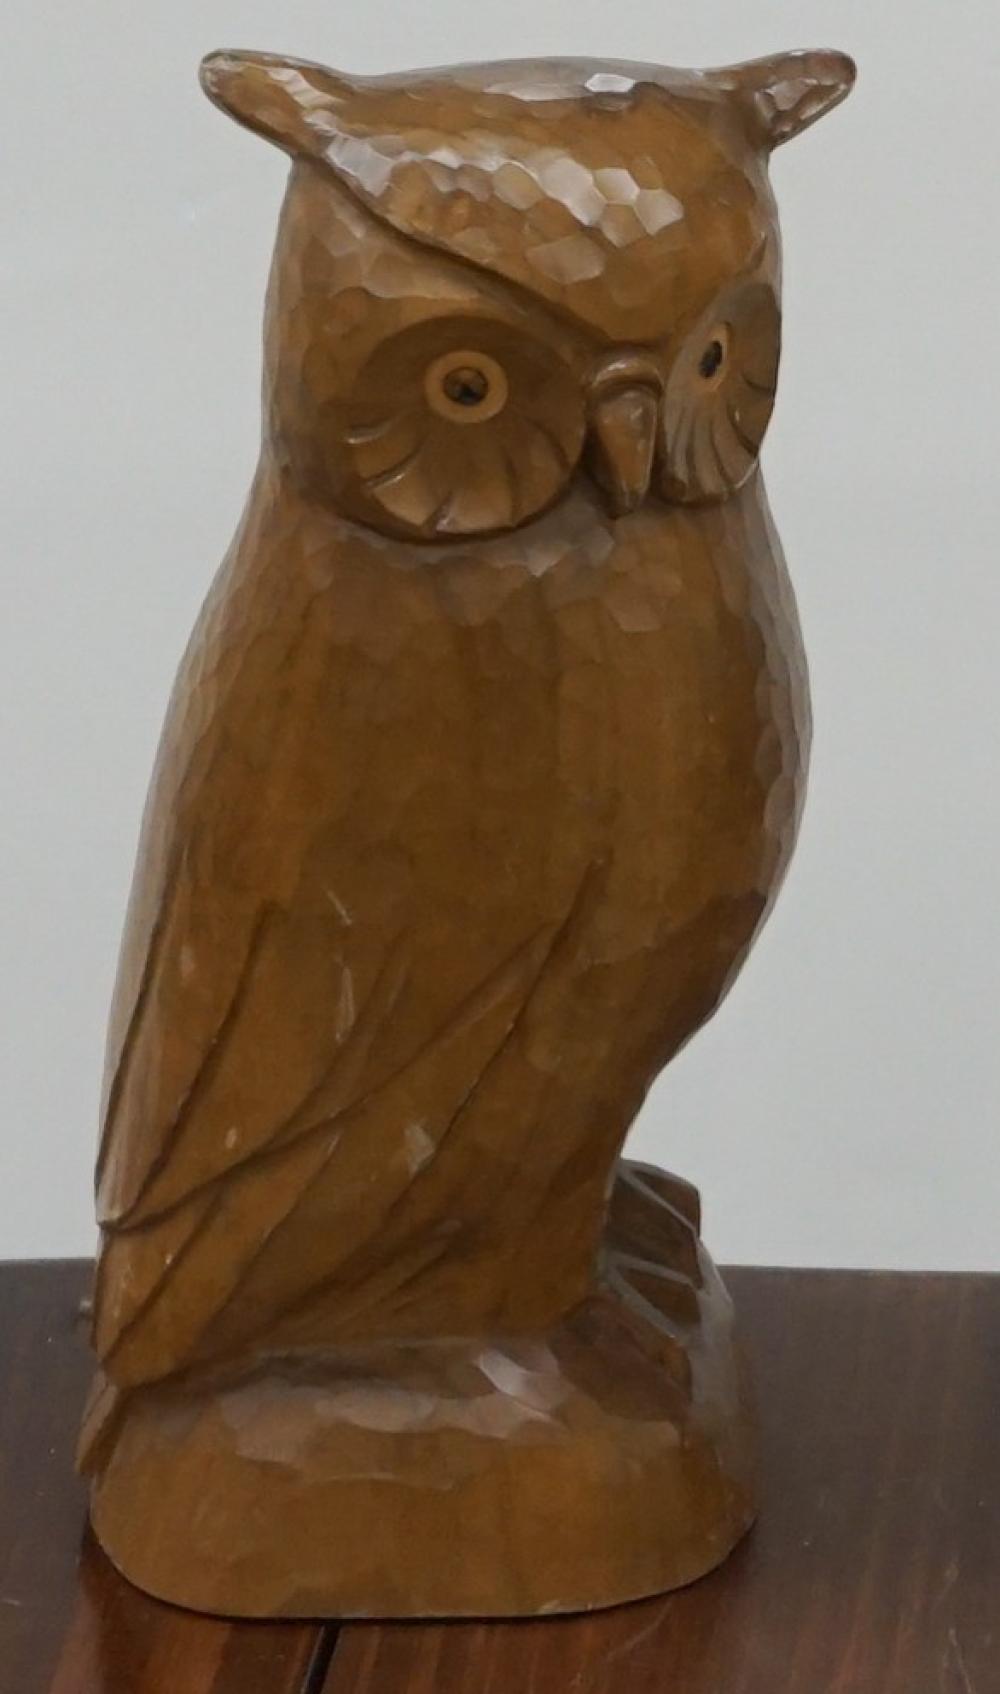 CARVED WOOD FIGURE OF AN OWL, H: